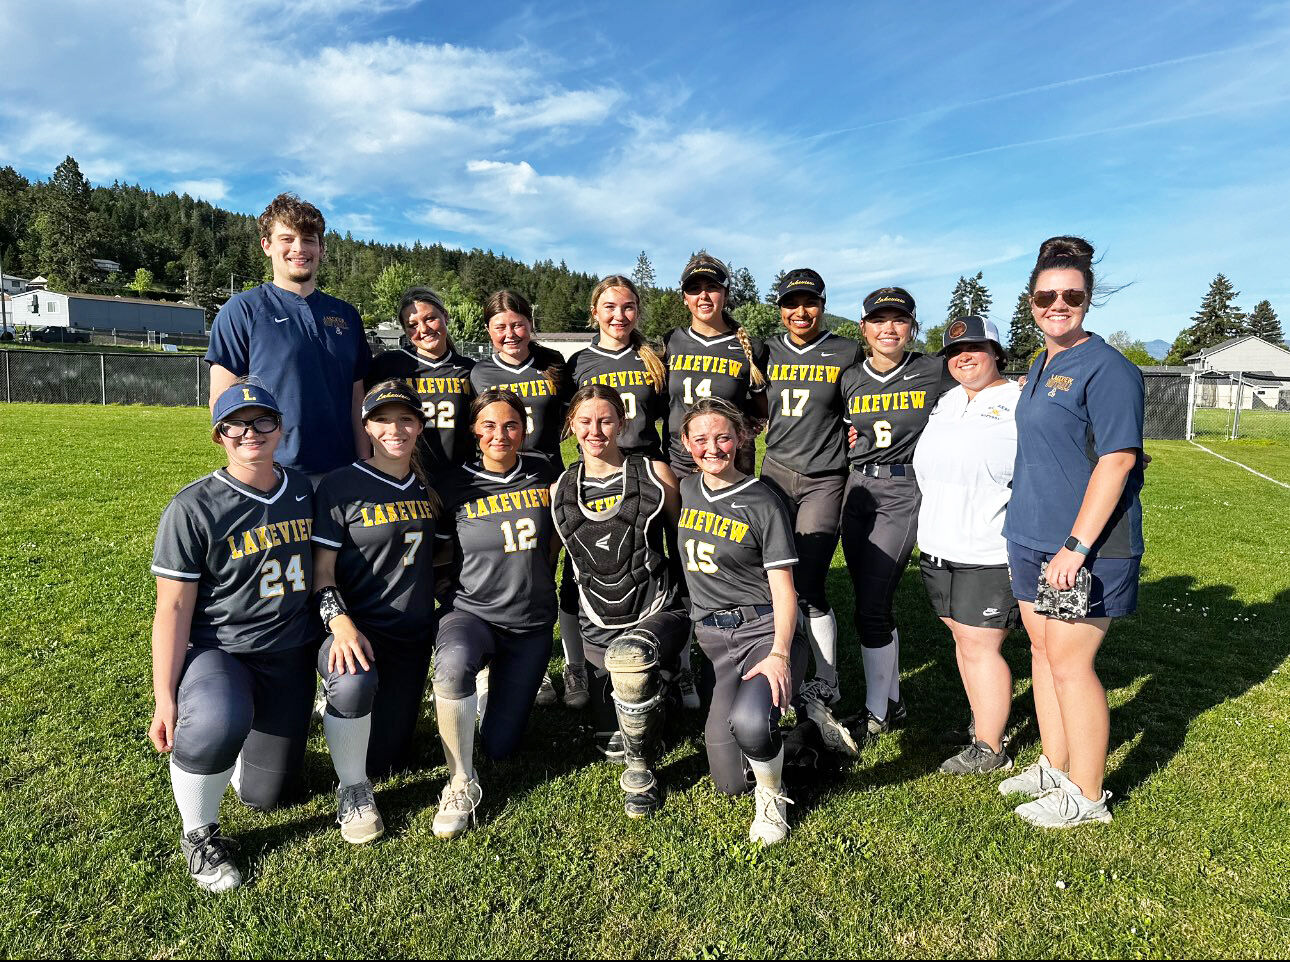 Lakeview Softball sweeps Sutherlin to advance to state playoffs